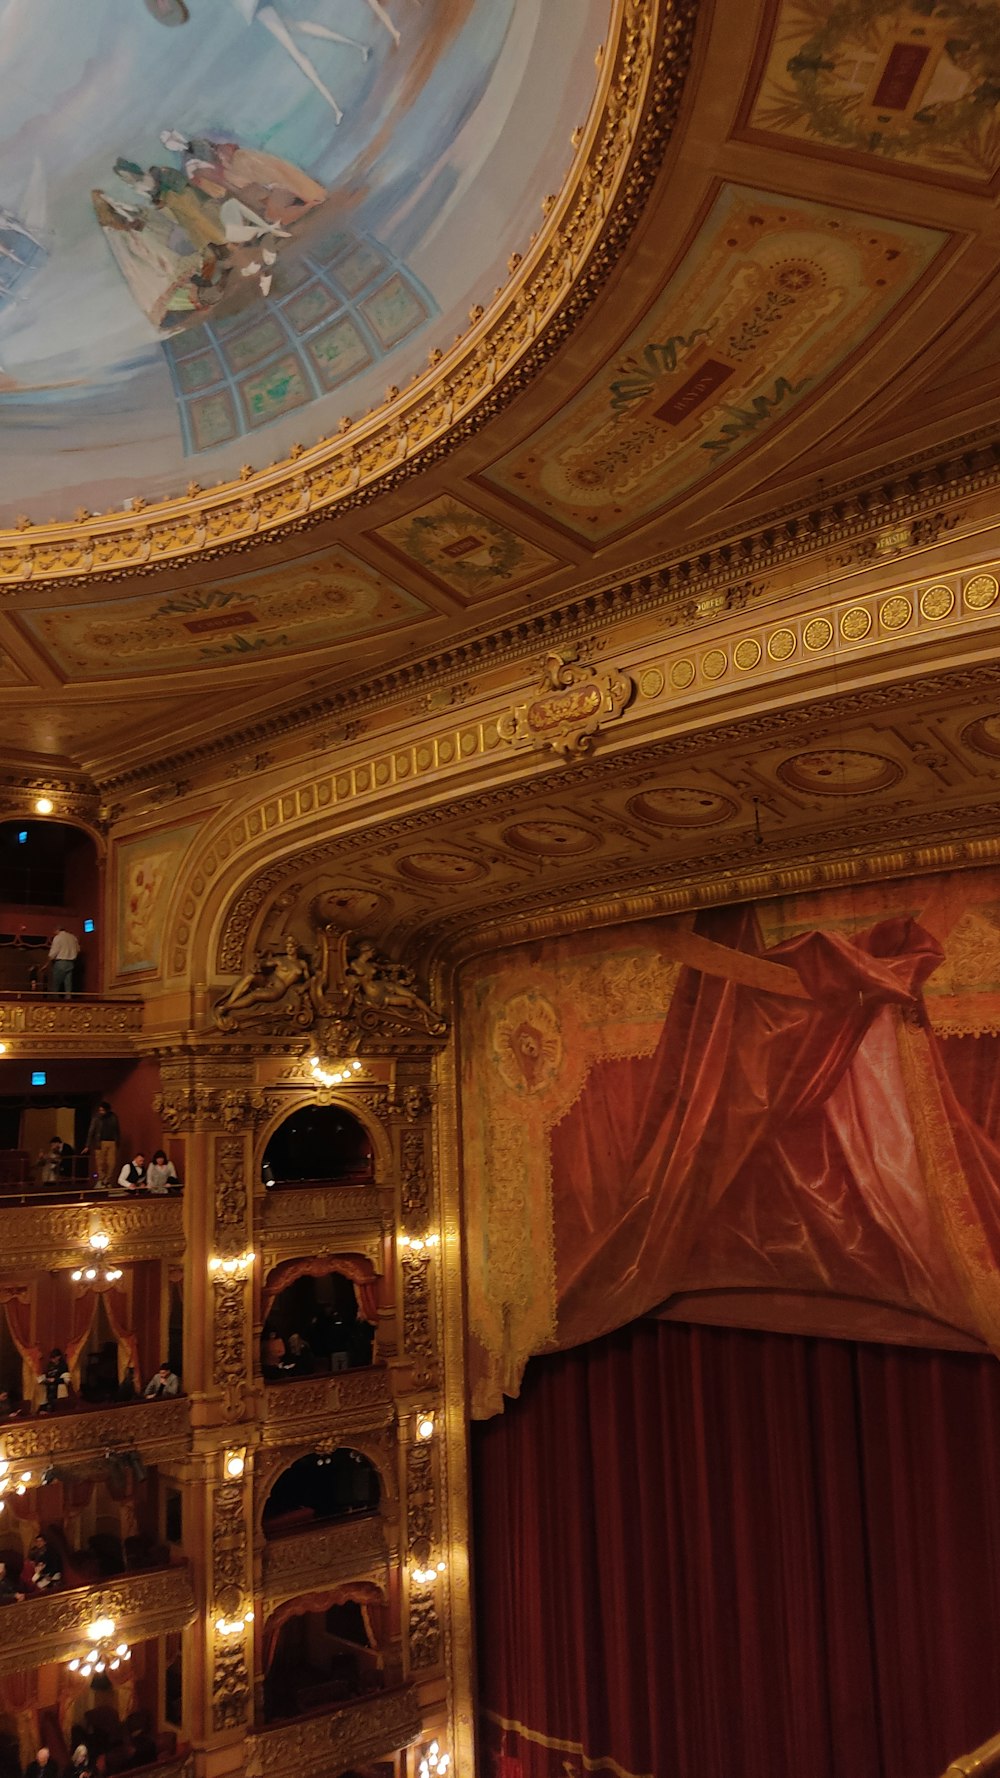 a view of a theater stage with a painted ceiling